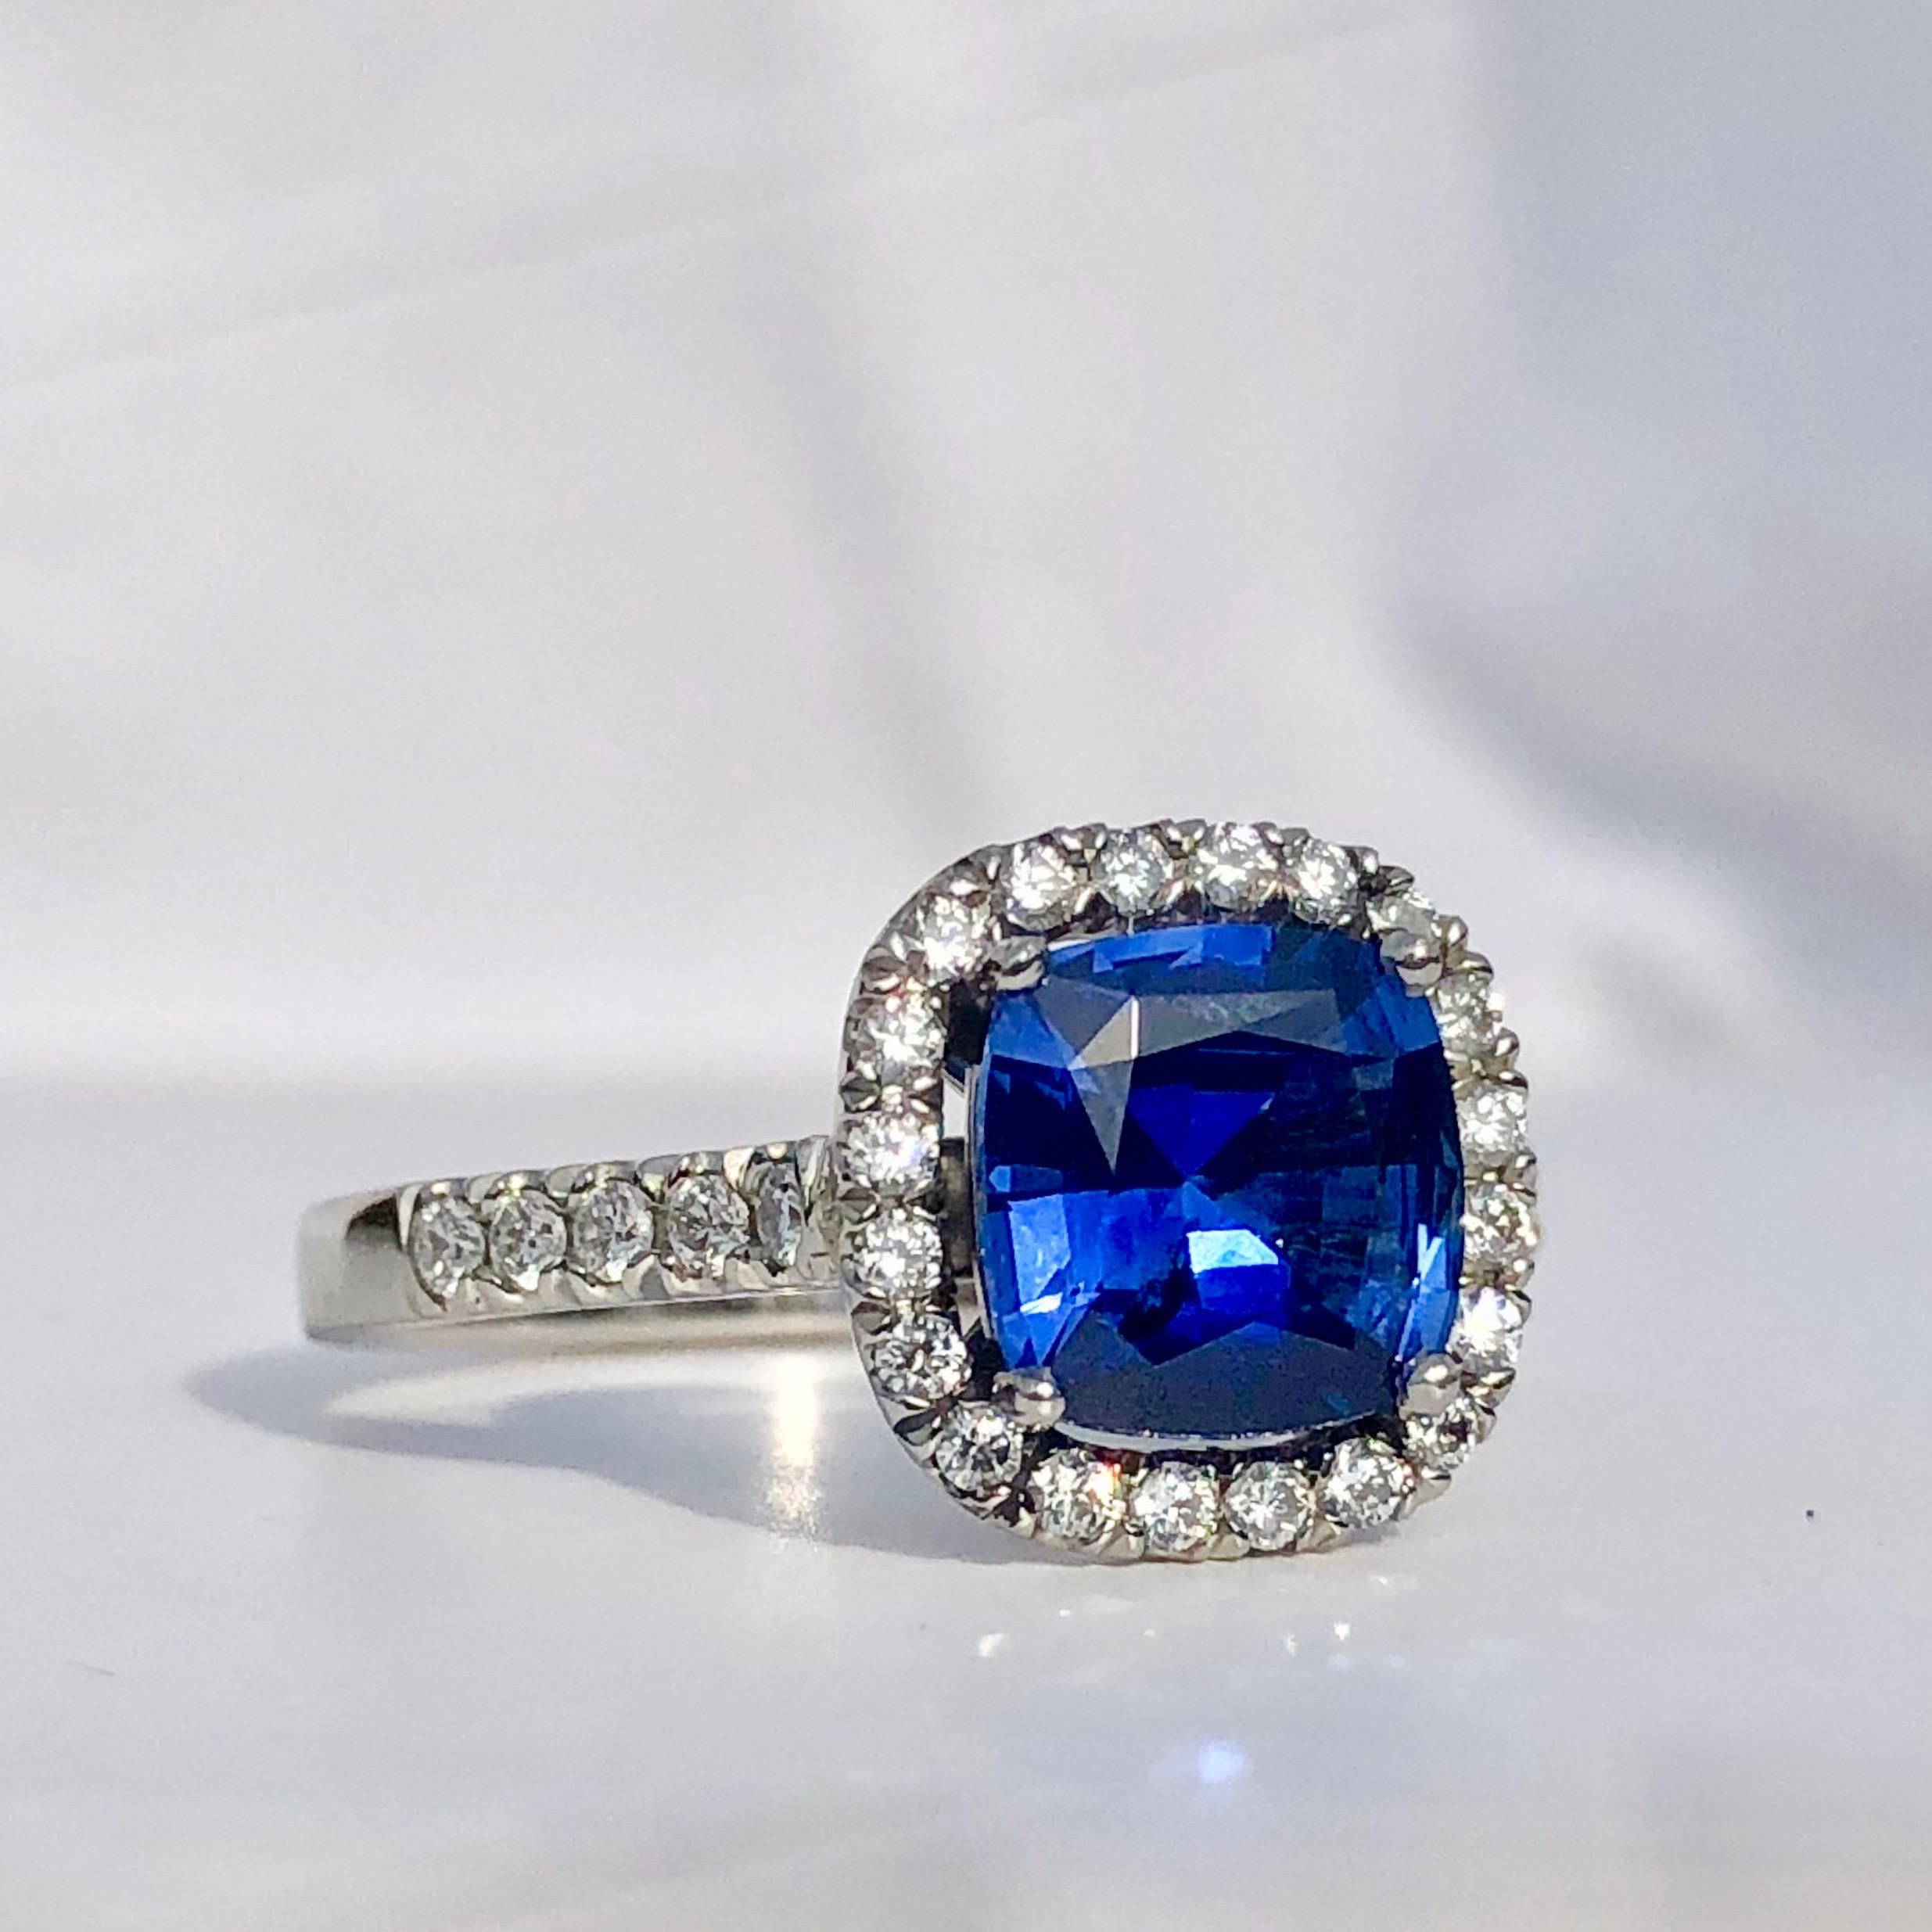 
This Rich Blue Sapphire Is Surrounded by a Halo of Round Brilliant Cut Diamonds Further Enhanced with Diamond Set Shoulders

Made for The Duchess of Diamonds Collection 

A Video of This Piece is Available Upon Request

The Duchess Of Diamonds